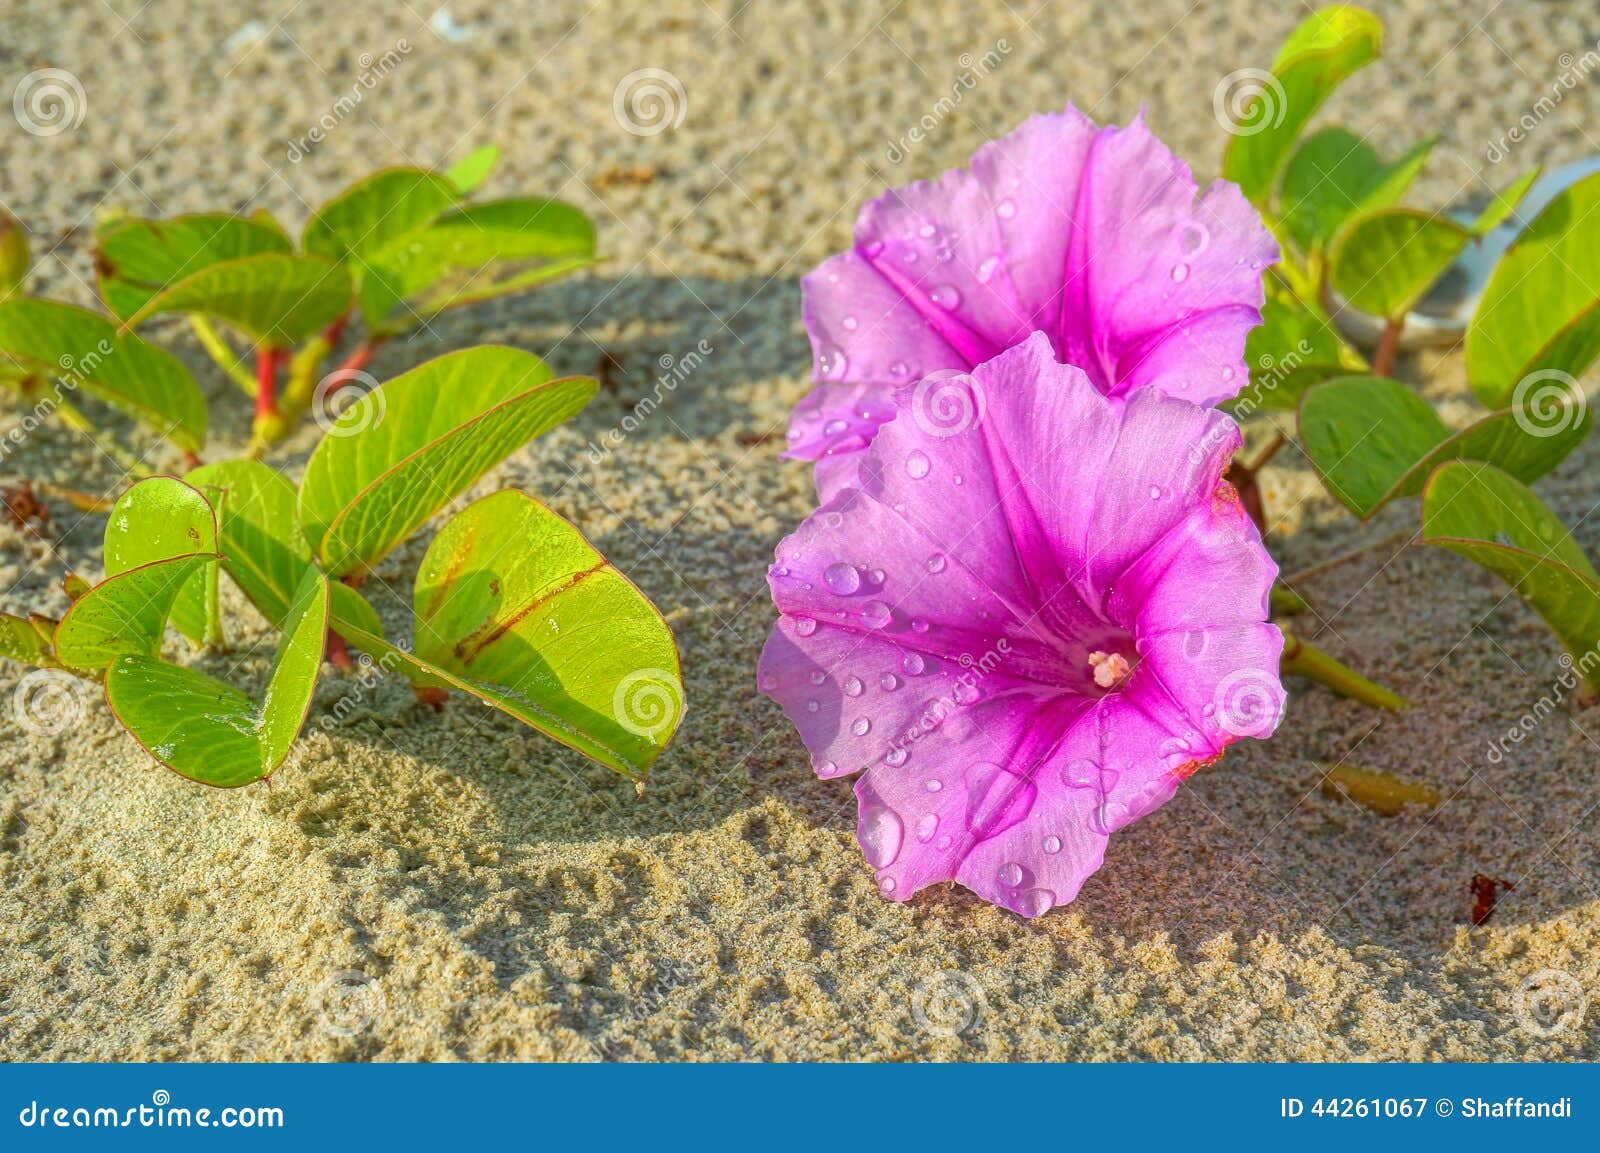 ipomoea flowers on the beach